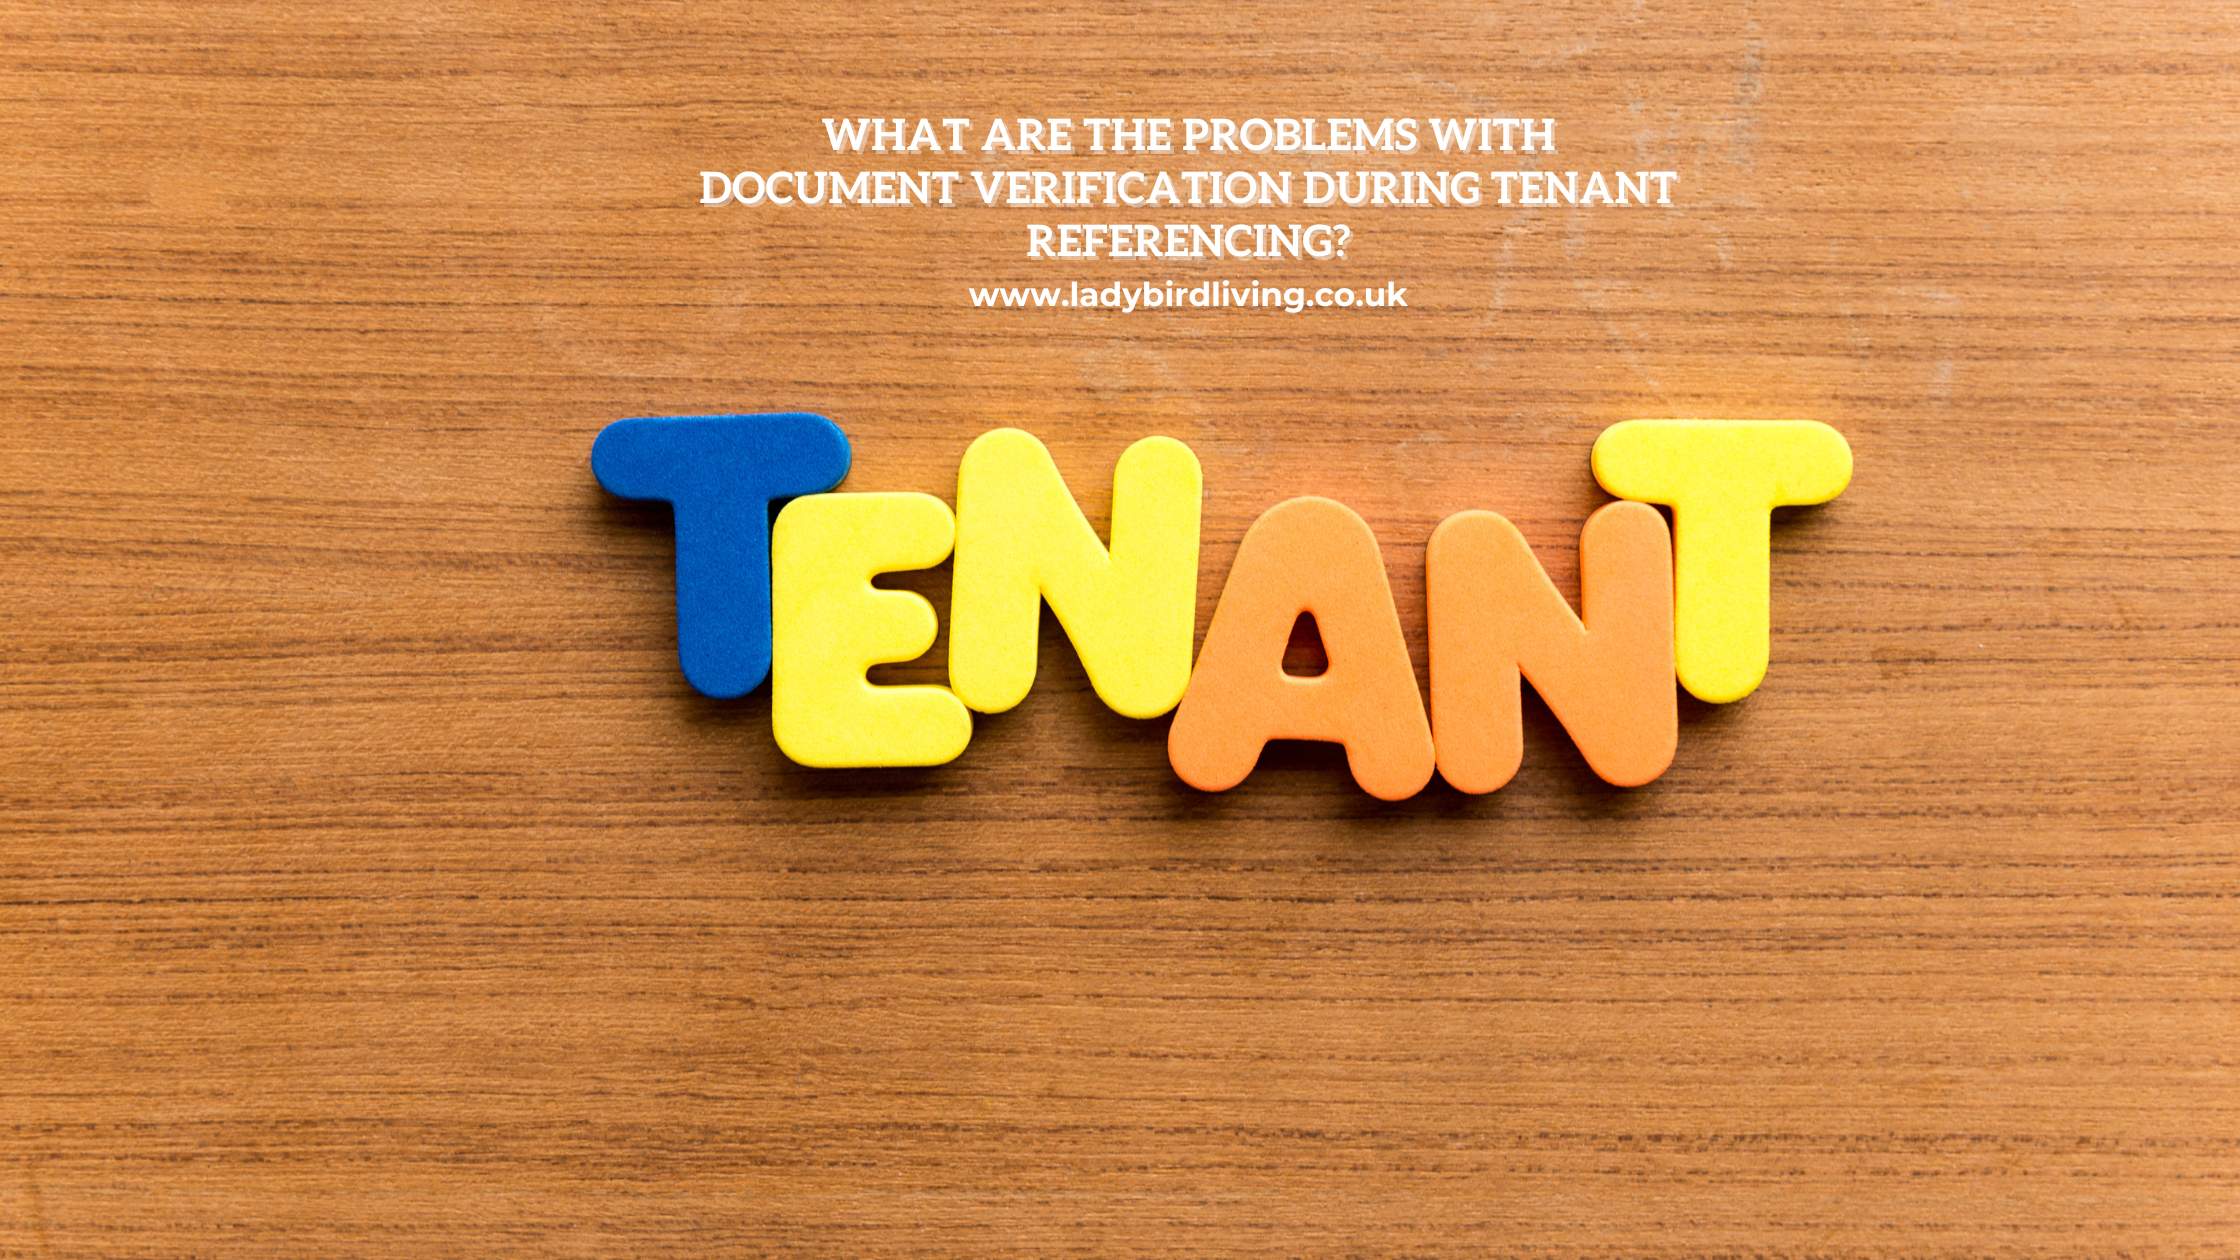 What are the problems with document verification during tenant referencing?